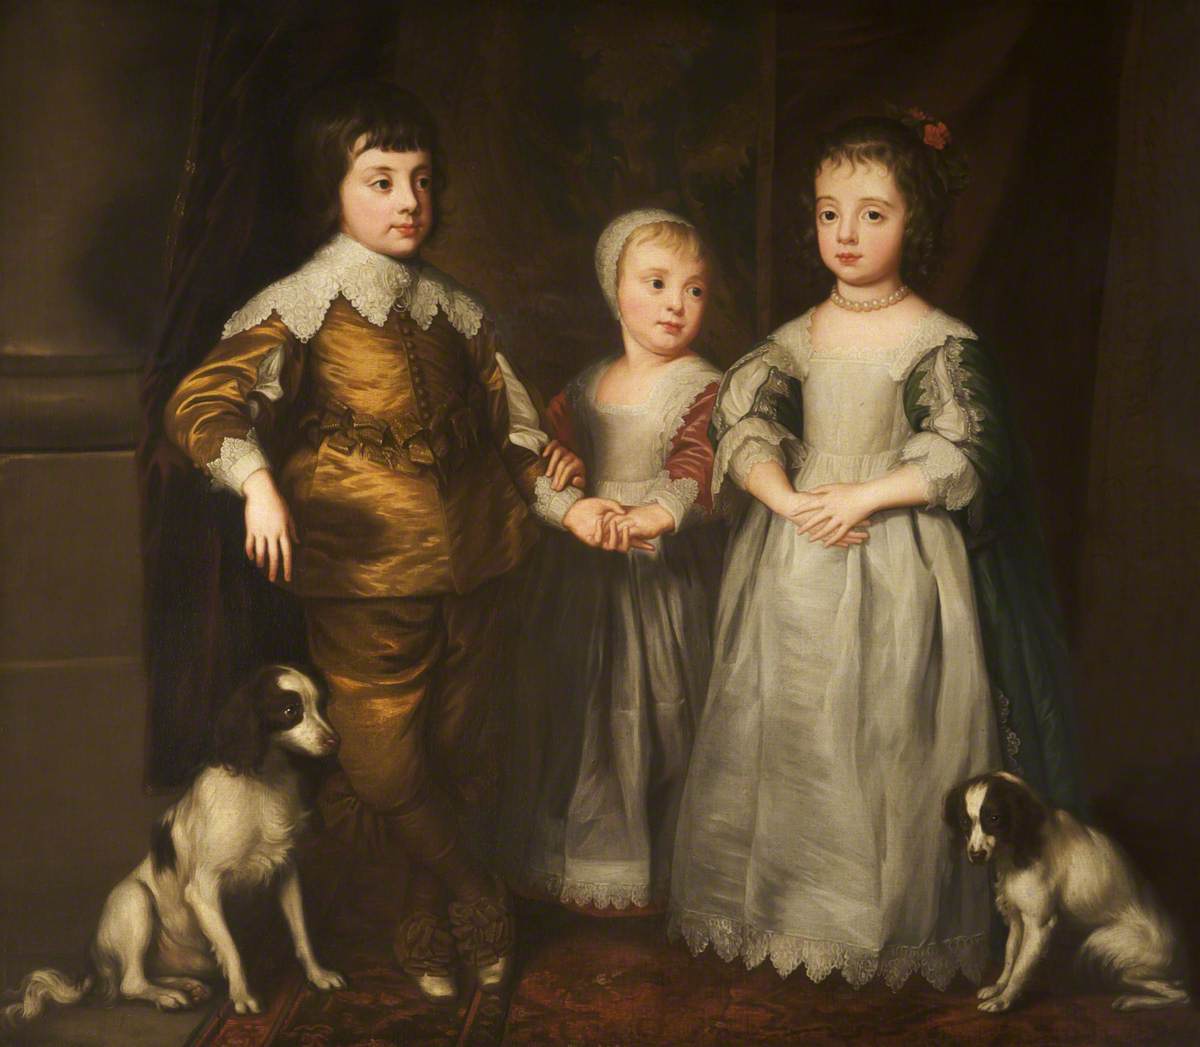 A full-length portrait of three children, two girls and a boy. The boy is wearing a bronze-colored outfit with lace trim and the girls are wearing gray dresses with lace trim and other embellishments. The older girl has her curls pulled half-back while the young girl wears a lace cap. There are two white and brown dogs seated on either side of the group and the younger girl is holding the hand and arm of the boy.